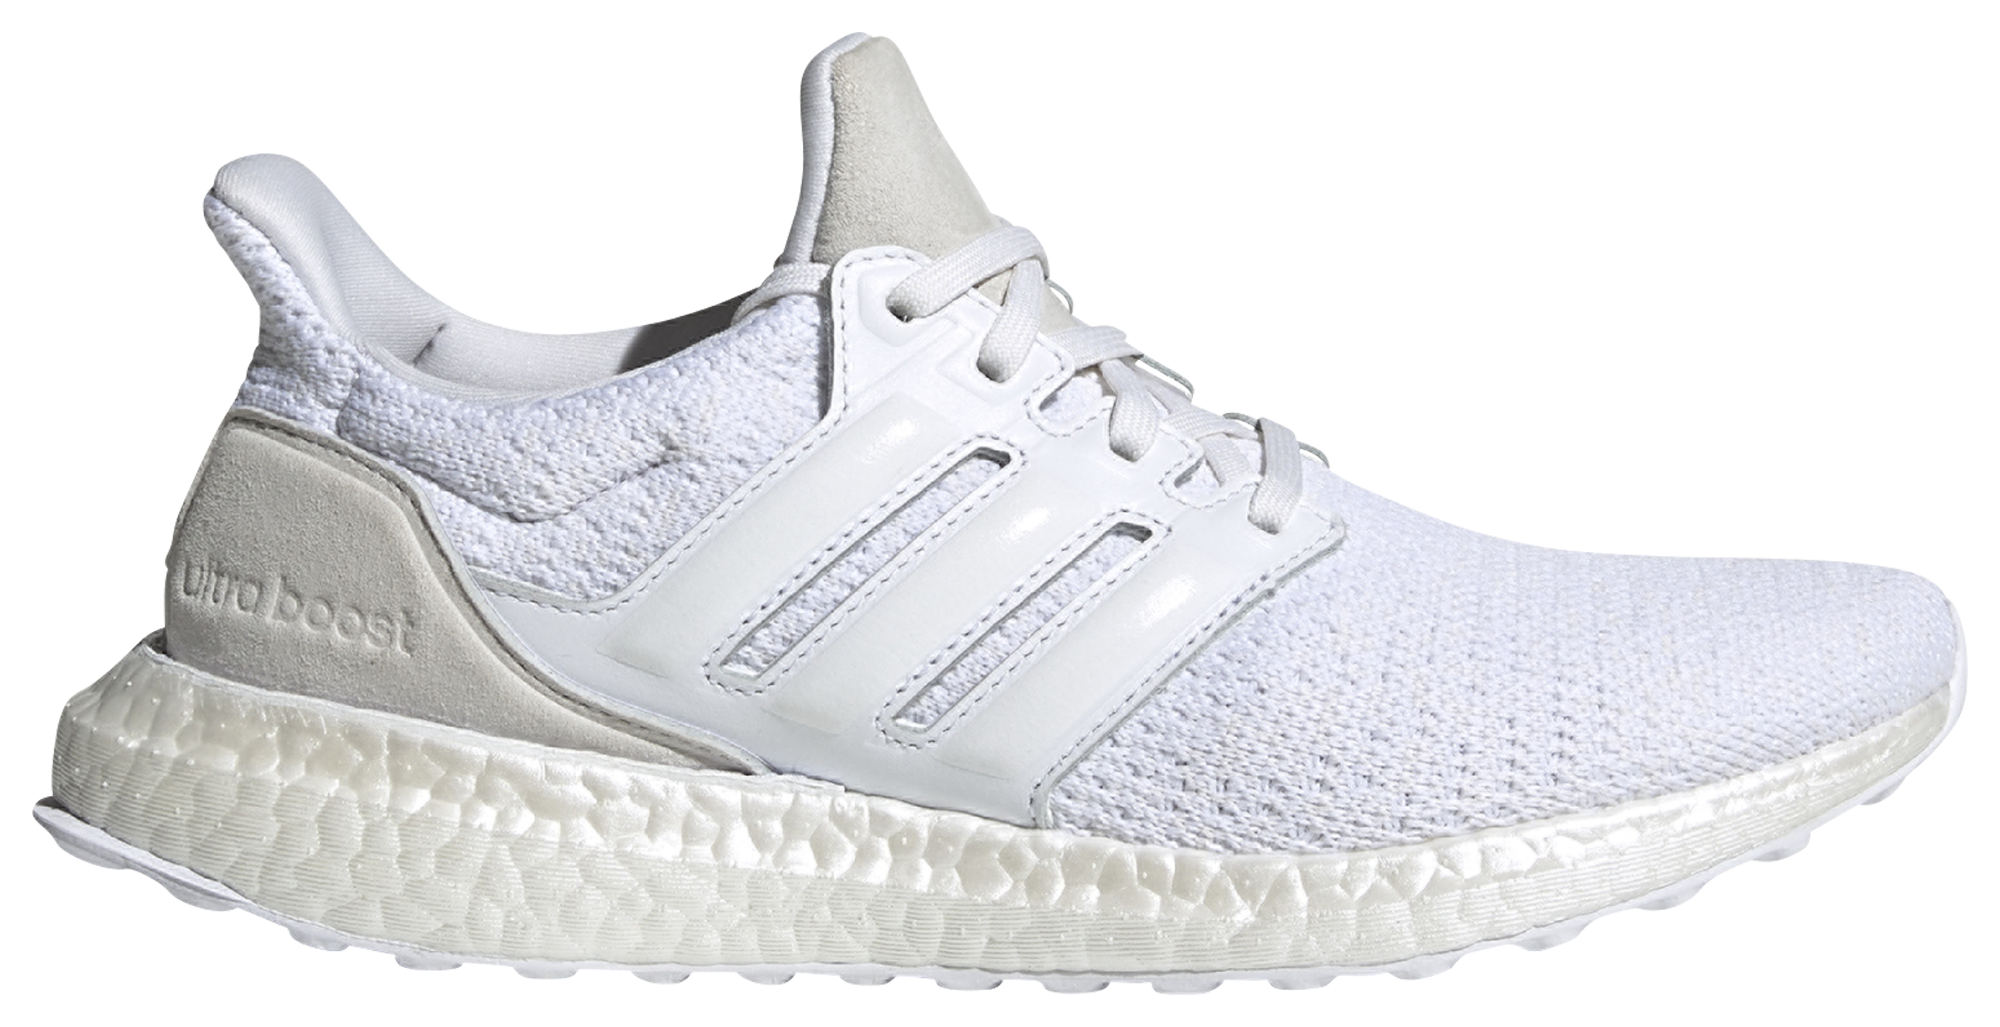 adidas boost women's shoes